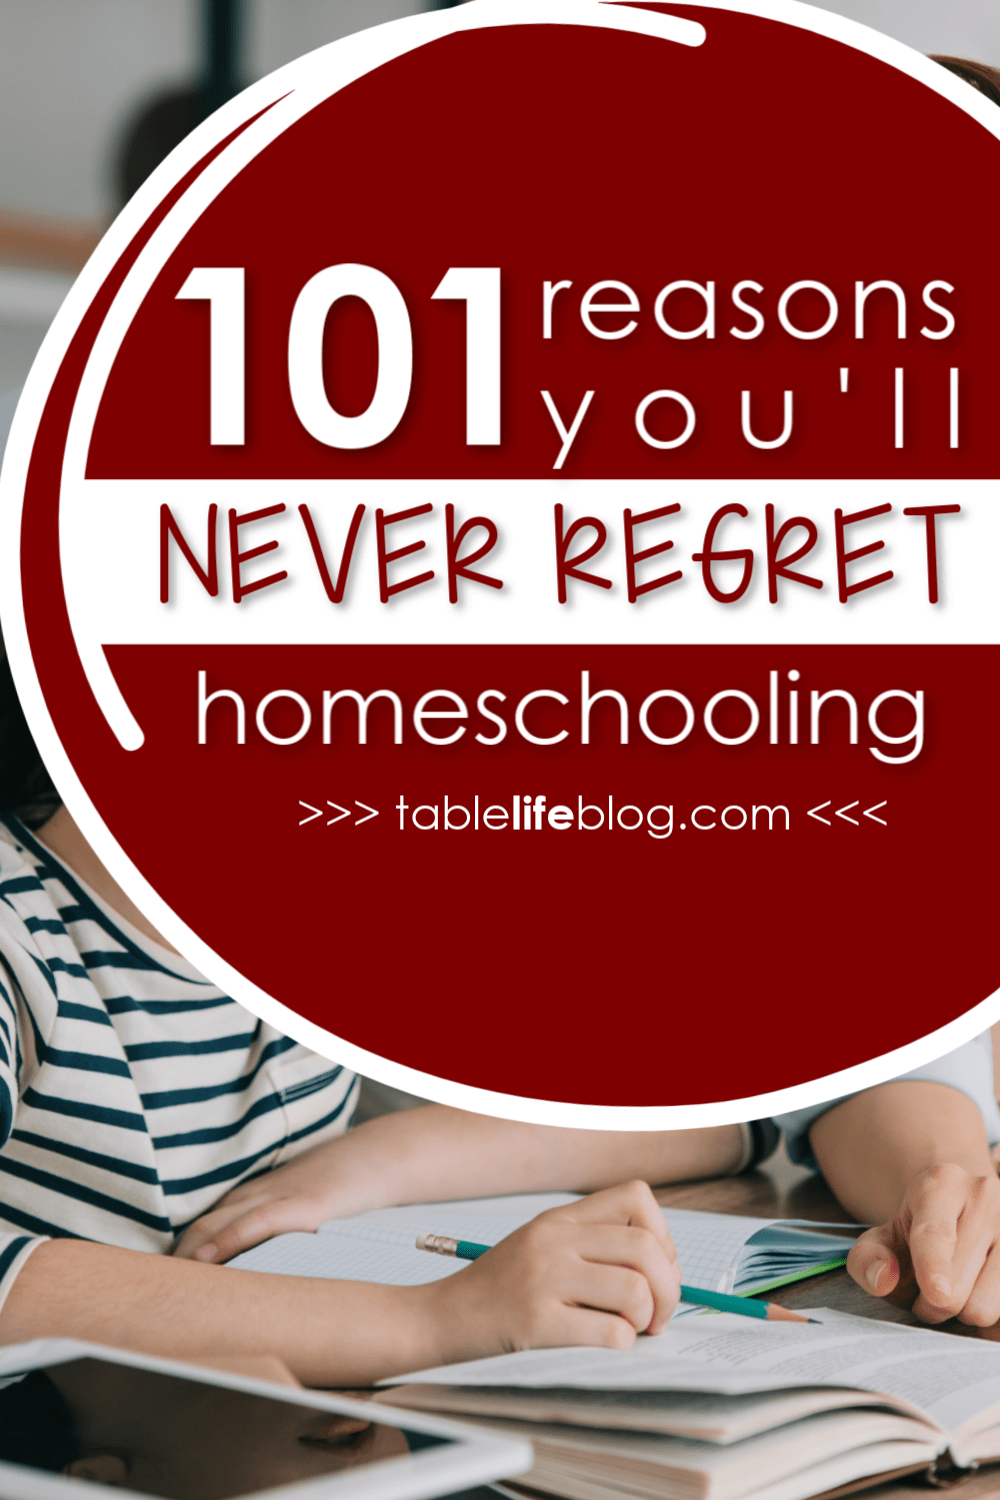 Homeschool life isn't easy and it definitely goes against the societal norm. Even so, there are lots of reasons you'll never regret homeschooling, even if everyone says you're crazy for doing it.